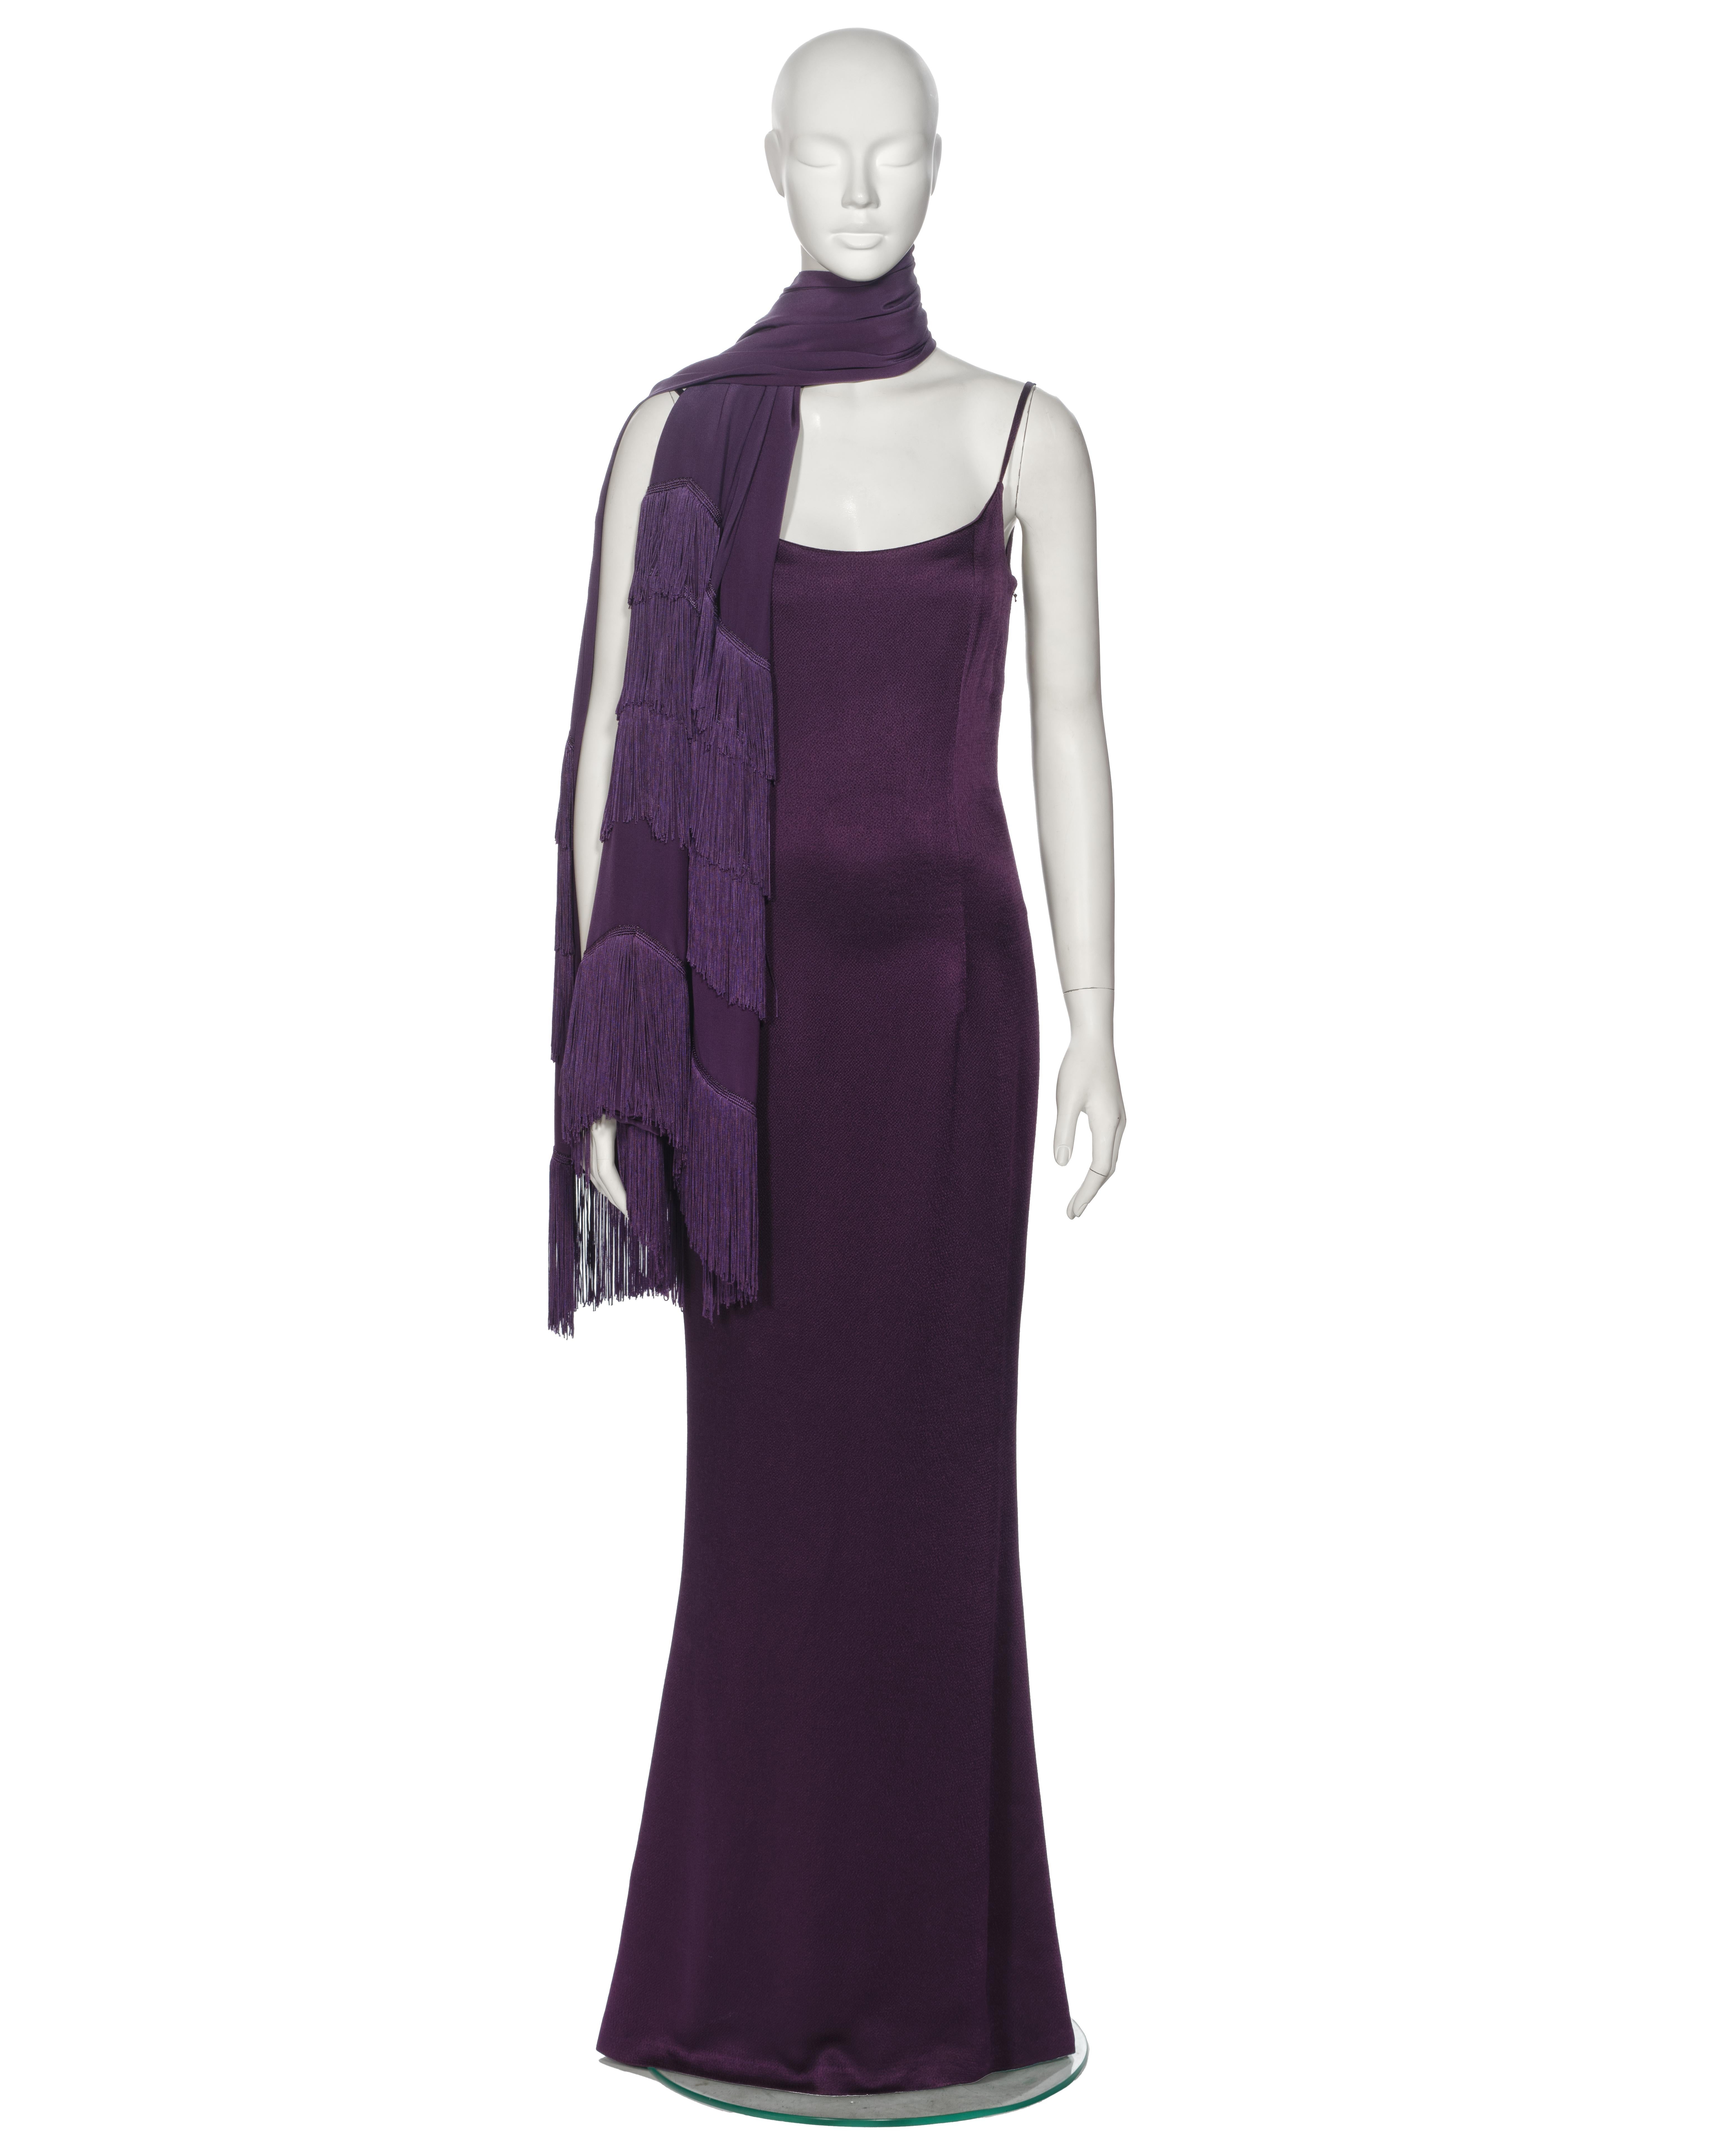 ▪ Christian Dior Evening Dress and Shawl Ensemble 
▪ Creative Director: John Galliano
▪ Spring-Summer 1998
▪ Sold by One of a Kind Archive
▪ Constructed from a deep purple hammered satin 
▪ Scoop neckline design 
▪ Spaghetti straps 
▪ Flared skirt